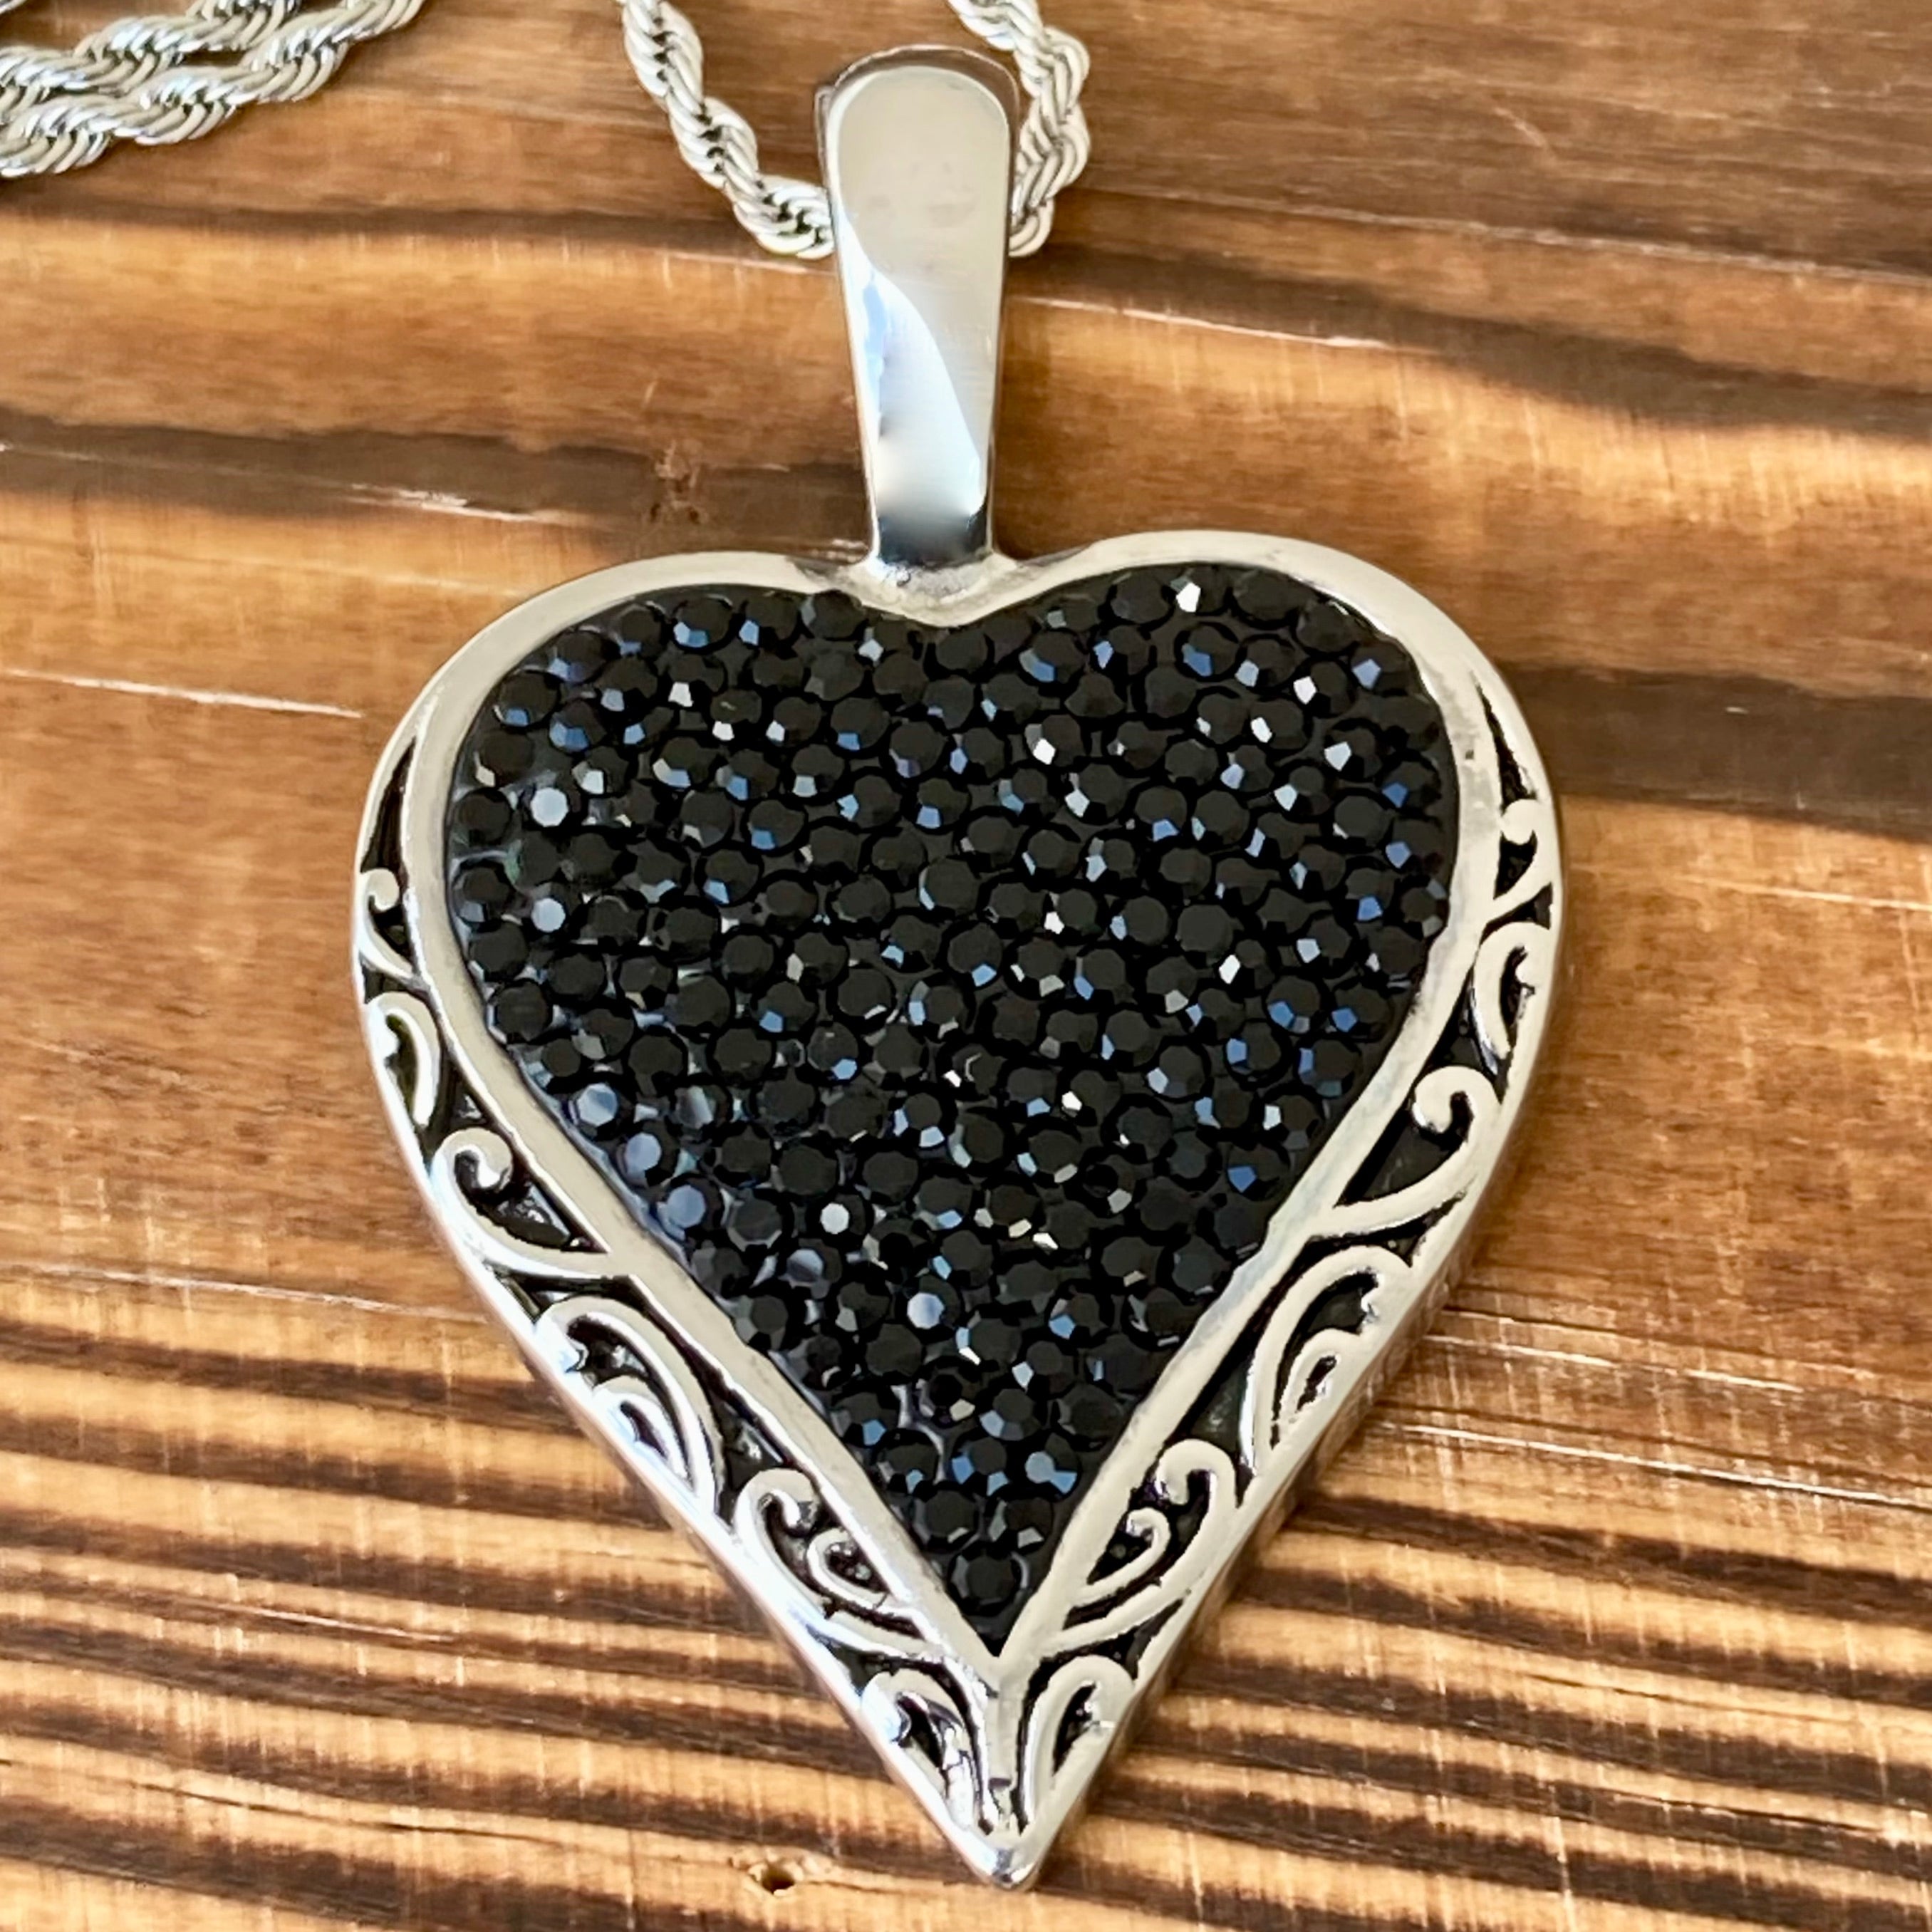 Korean Fashion Black Rope Leather Necklace With Pendant With Adjustable  Metal Love Heart For Women From Taihangshan, $11.55